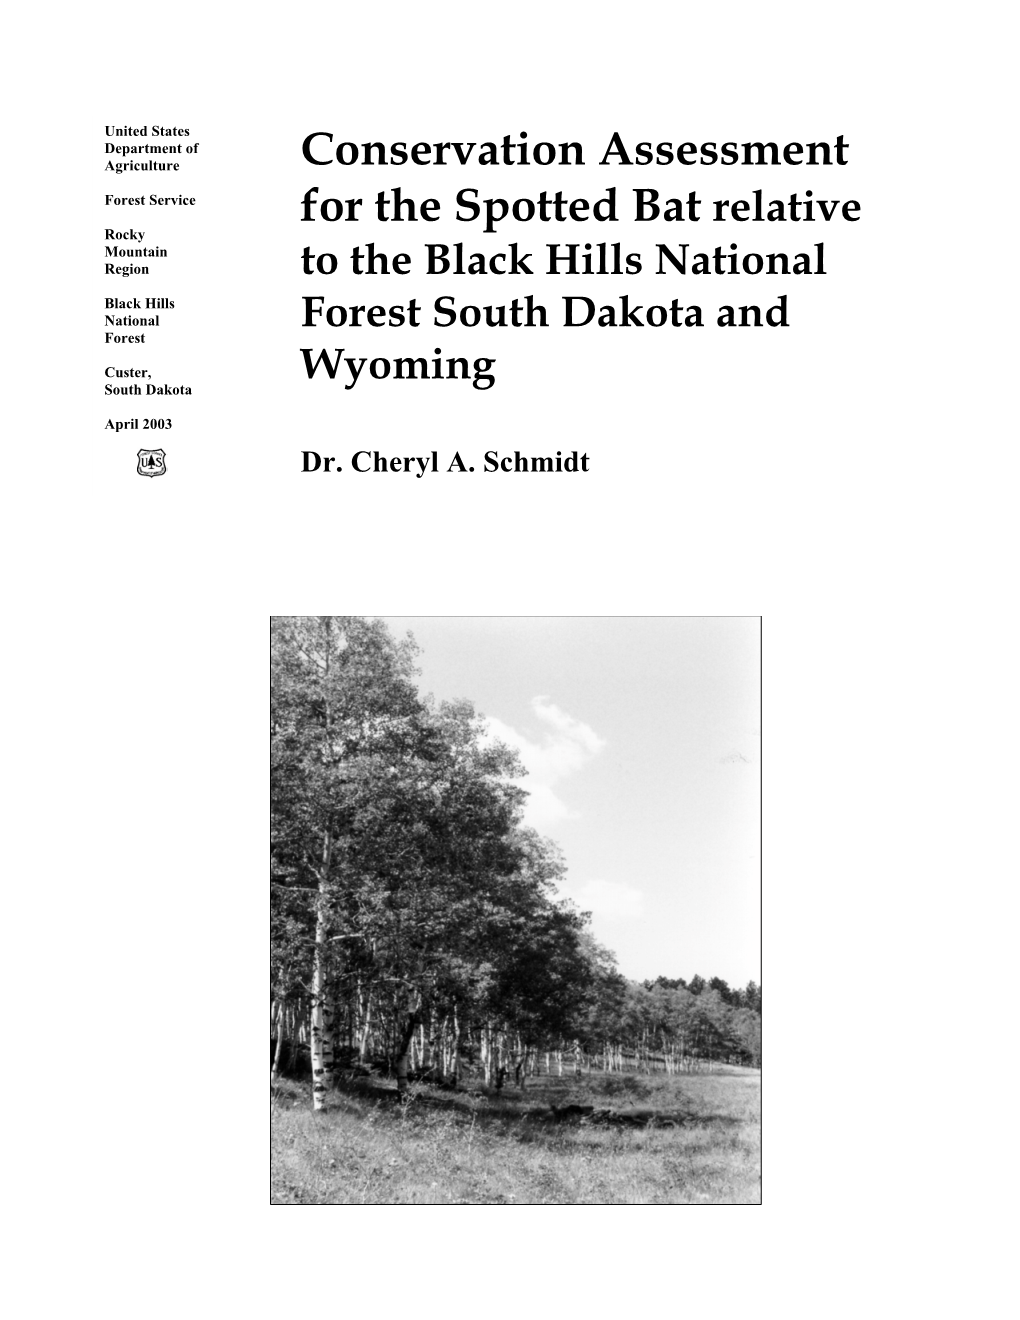 Conservation Assessment for the Spotted Bat Relative to the Black Hills National Forest, South Dakota and Wyoming